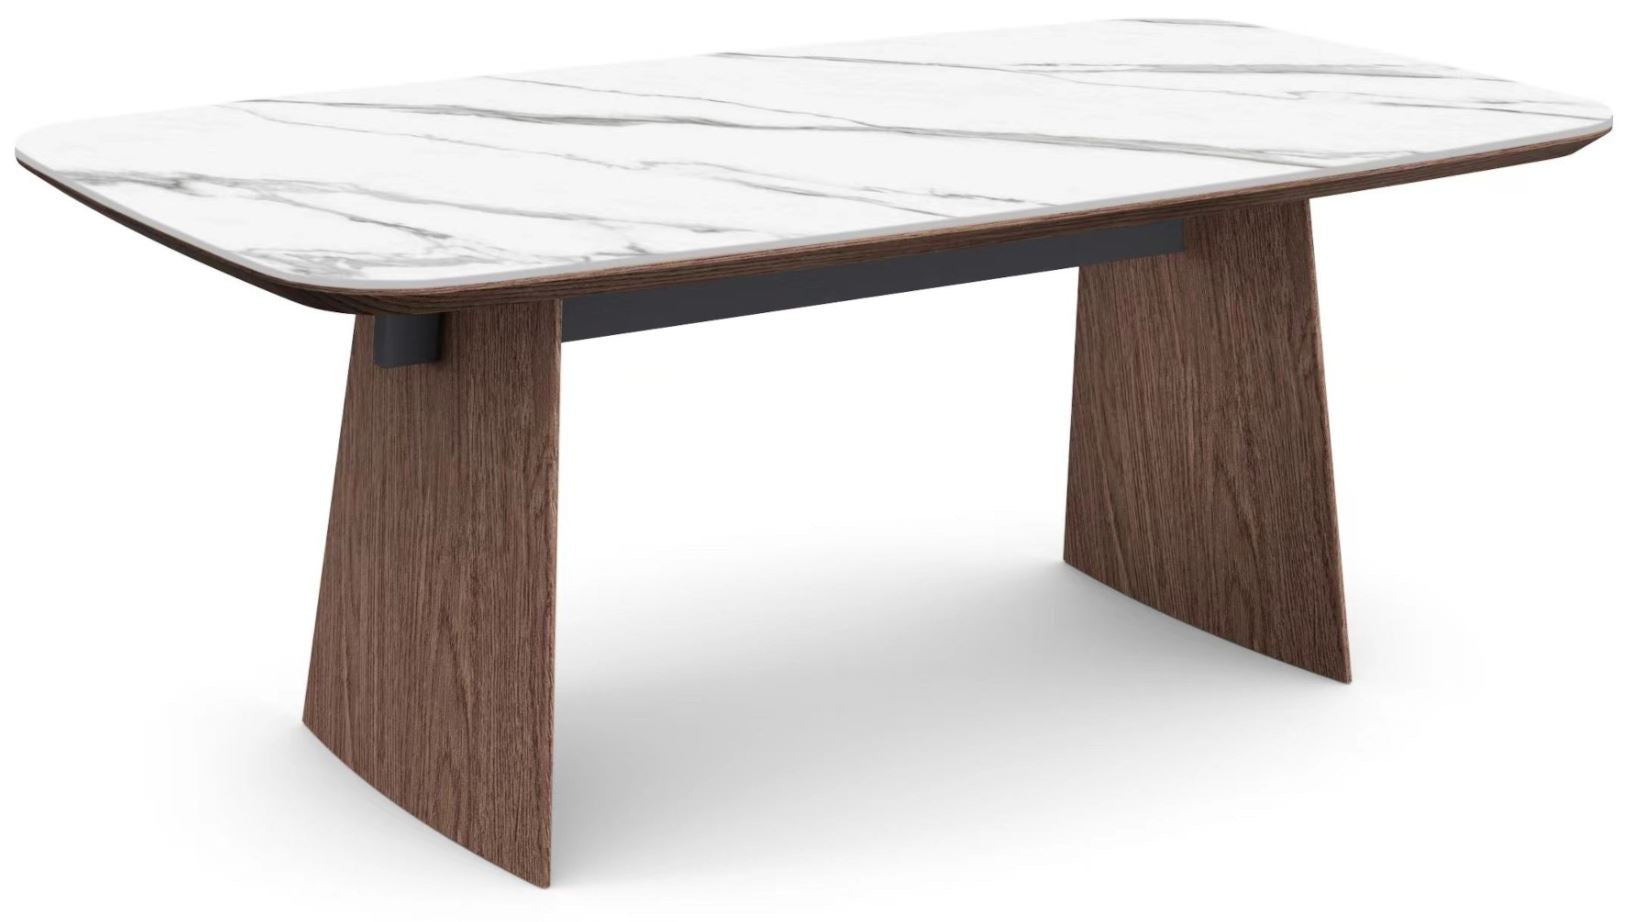 Trentino Sintered Stone Top Table